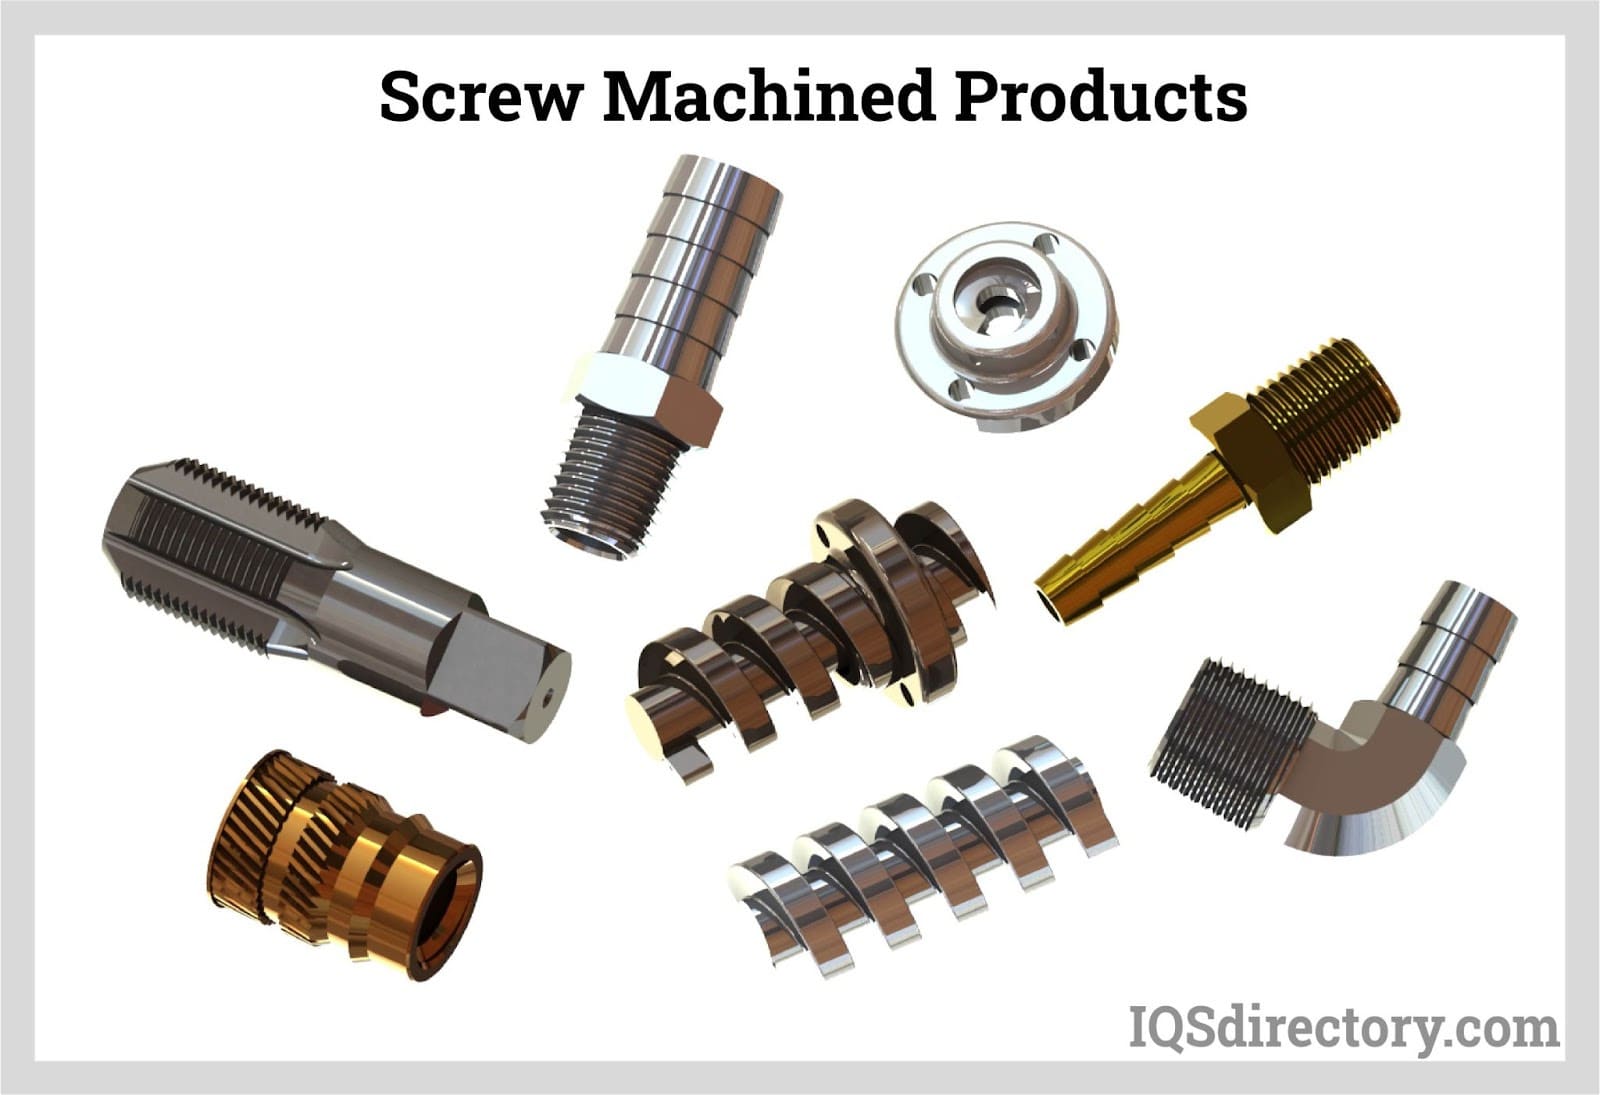 Screw Machined Products